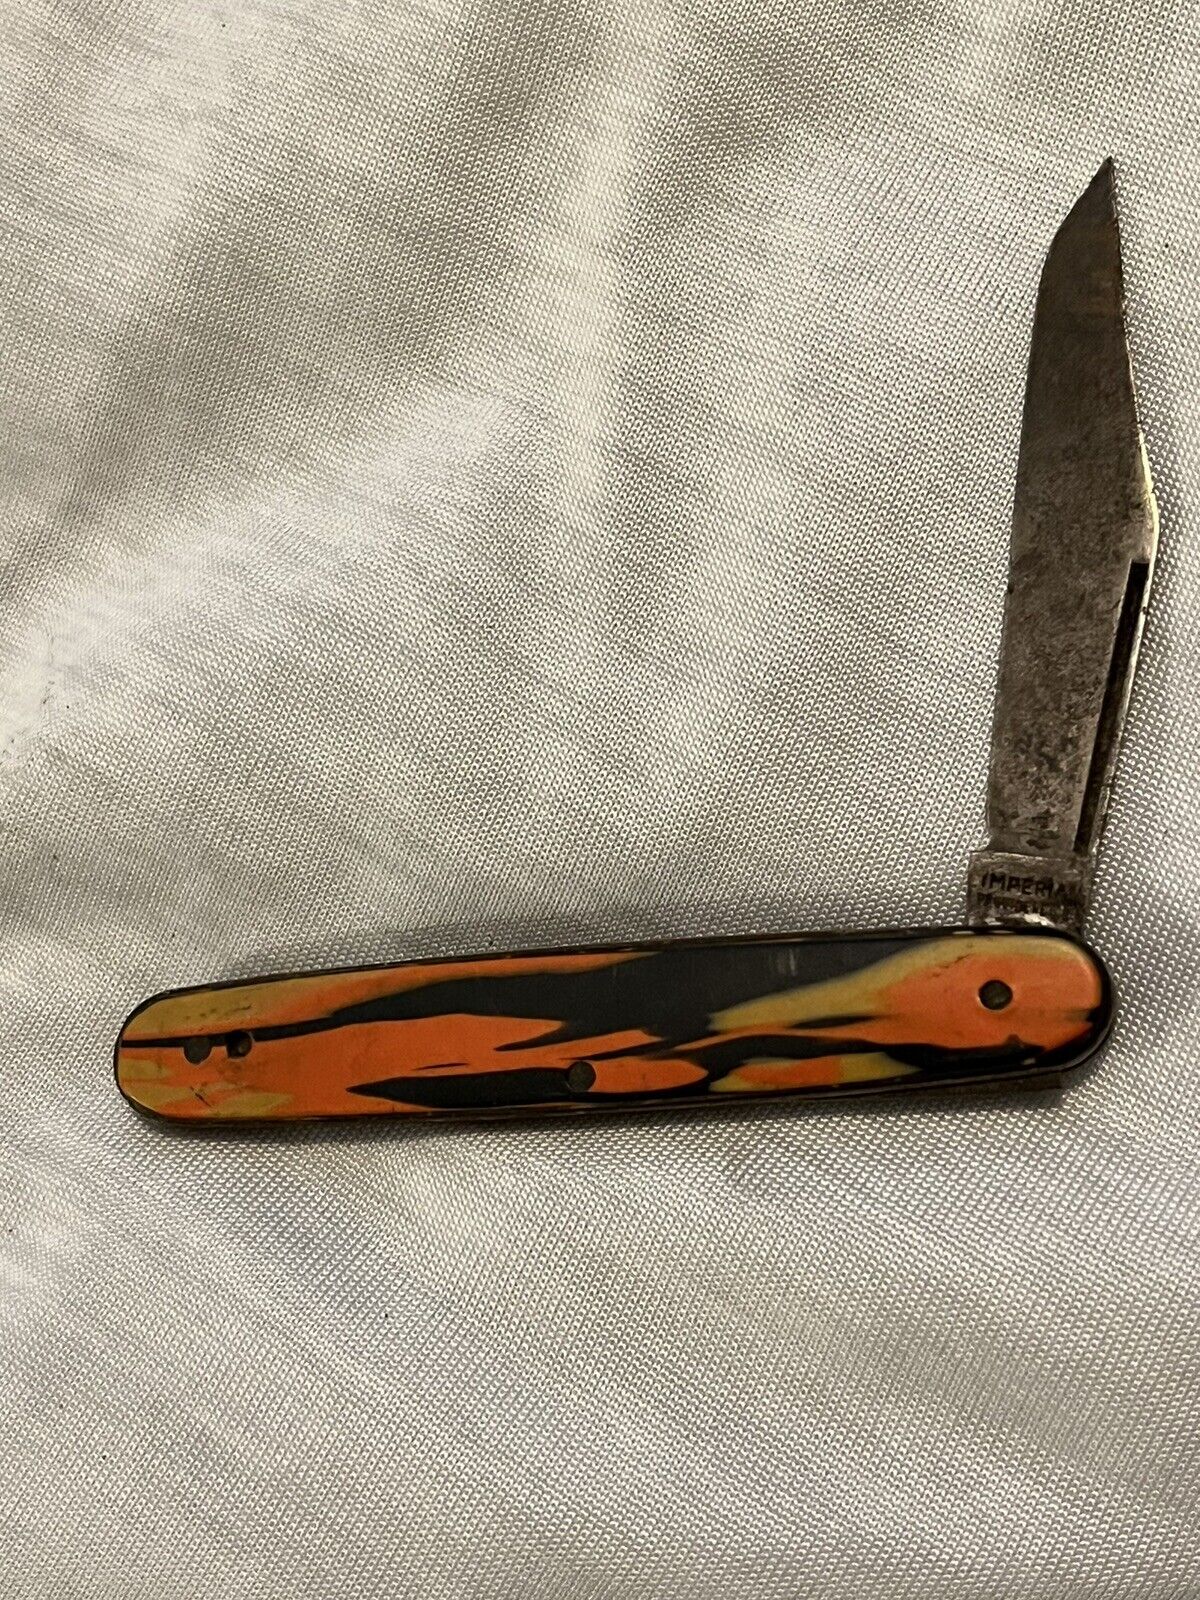 Unique Vintage Imperial Pocket Knife Very Colorful Rare Pattern